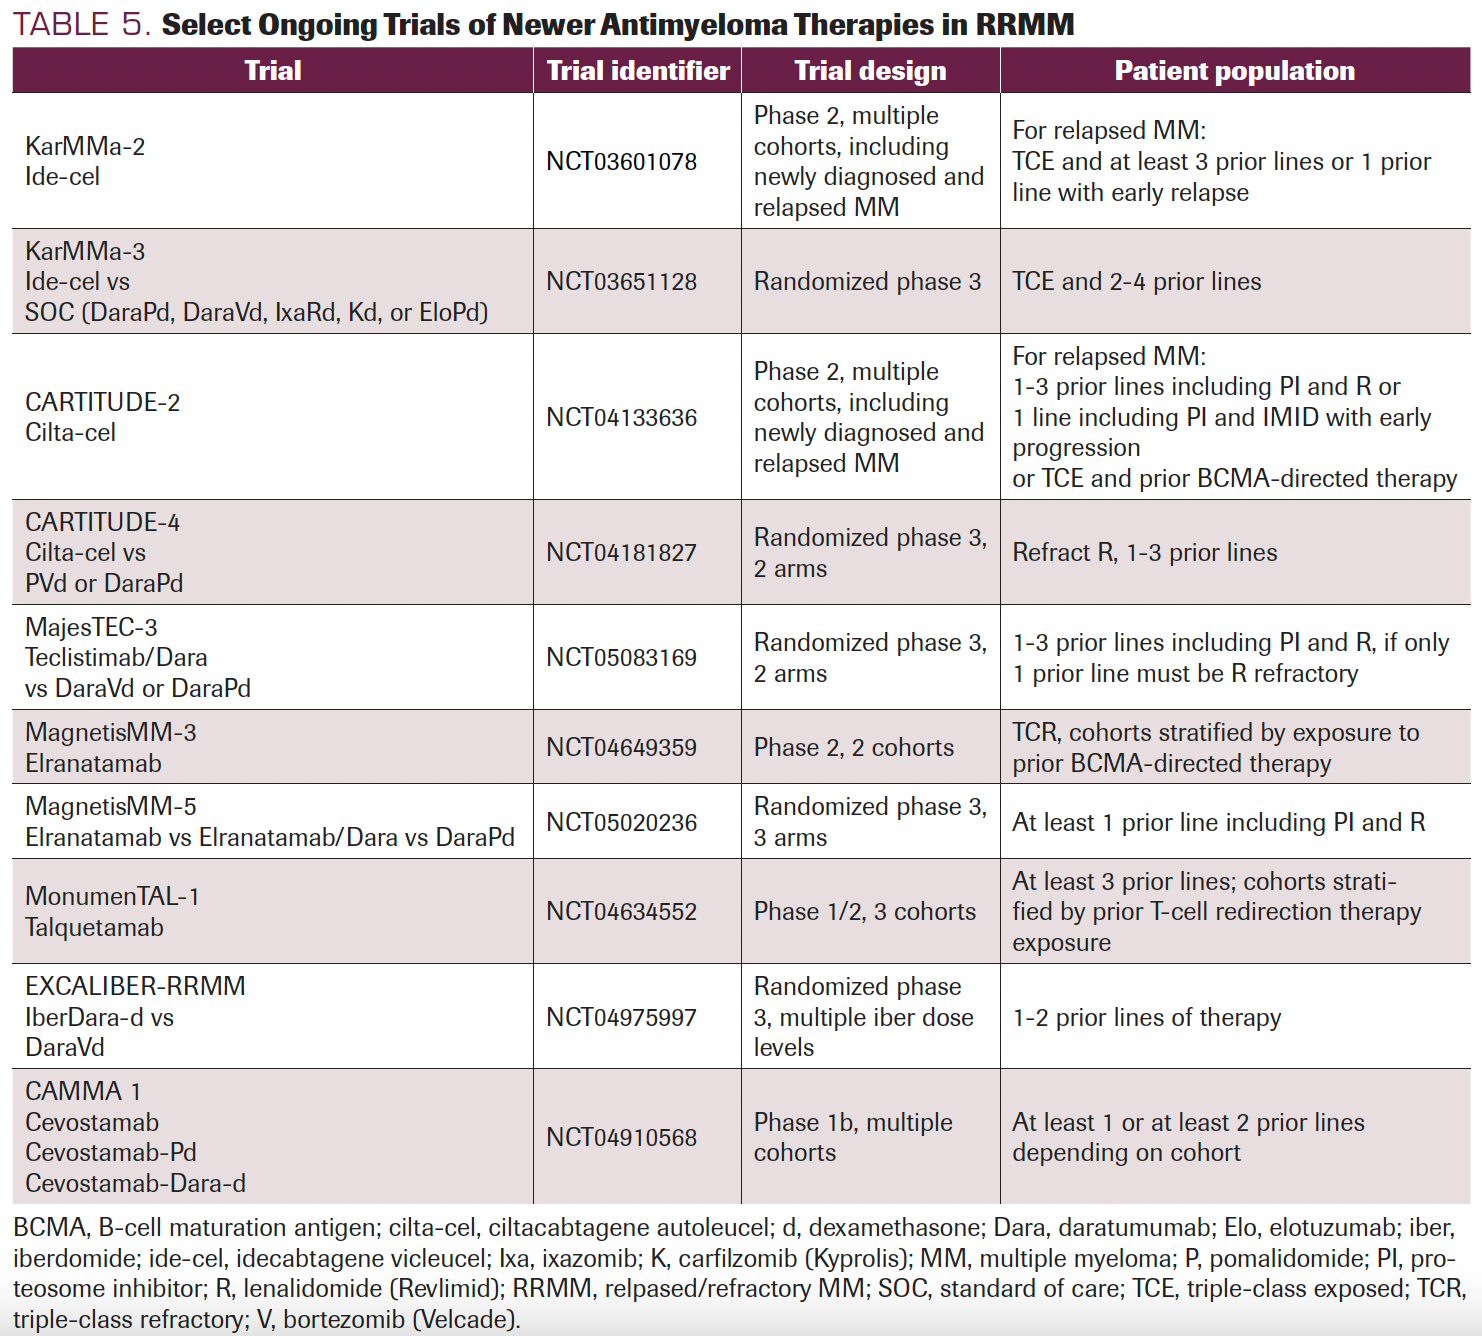 TABLE 5. Select Ongoing Trials of Newer Antimyeloma Therapies in RRMM